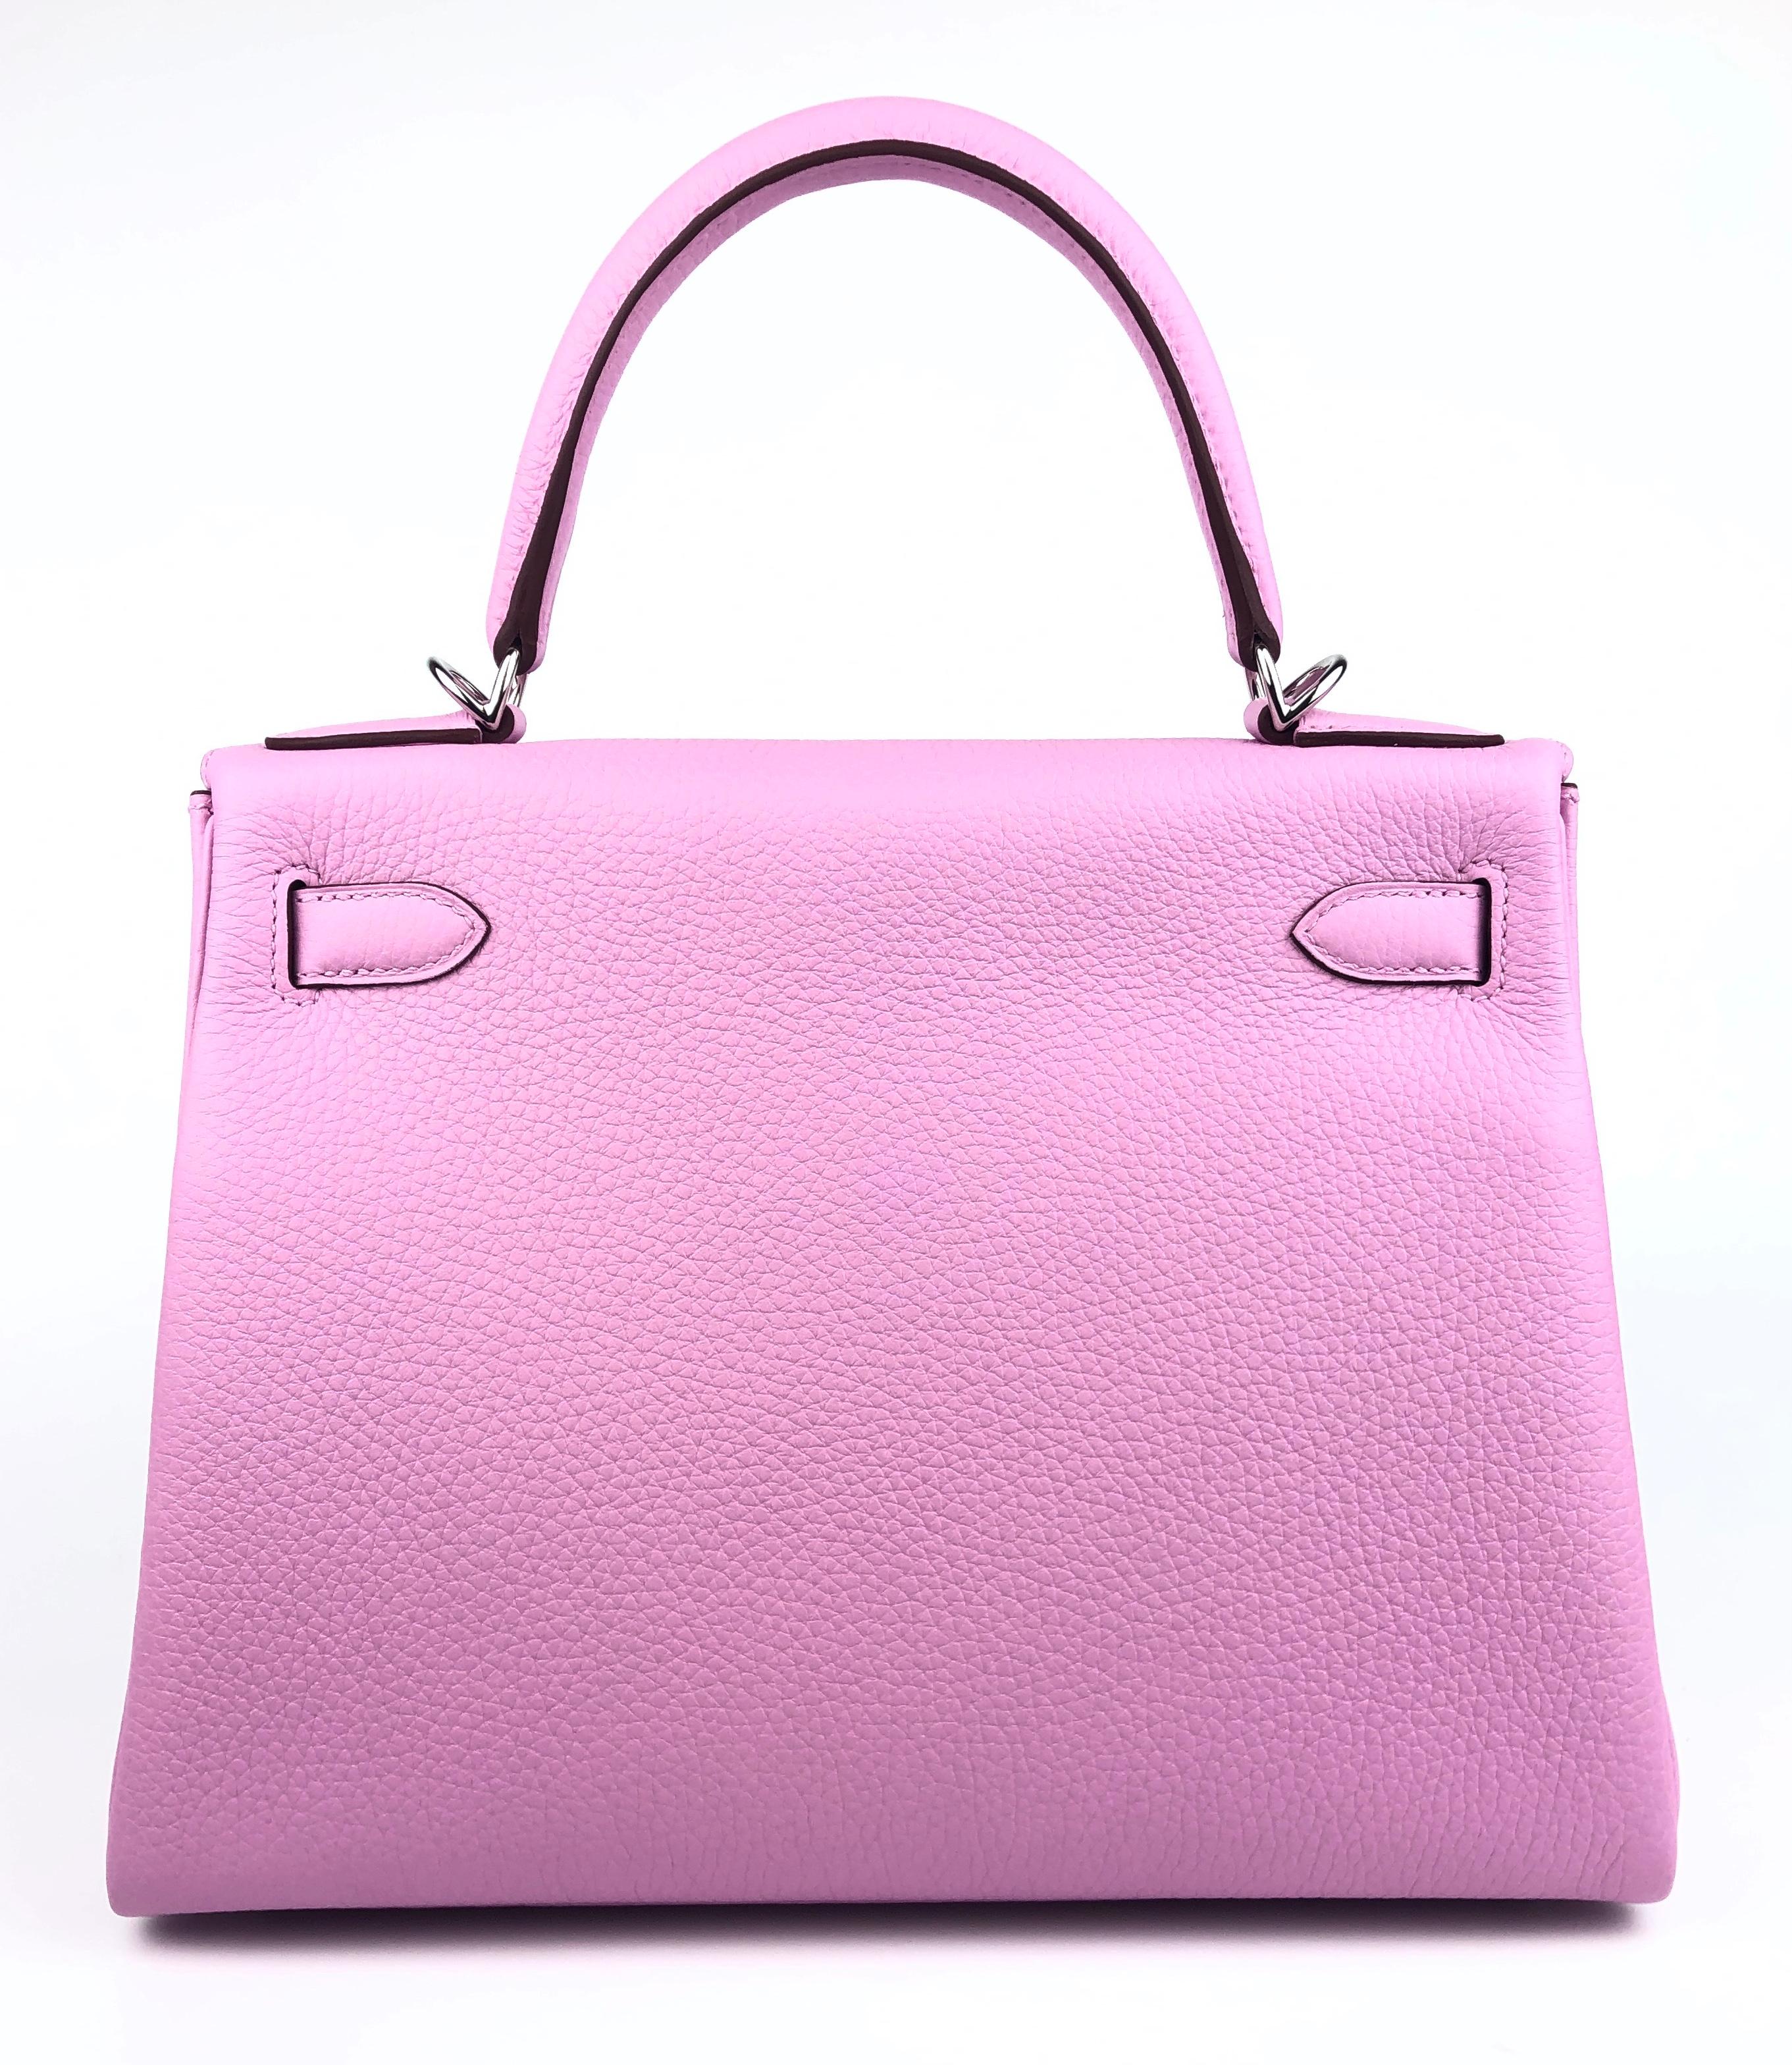 Hermes Kelly 28 Mauve Sylvester Pink Leather Palladium Hardware NEW For Sale 1